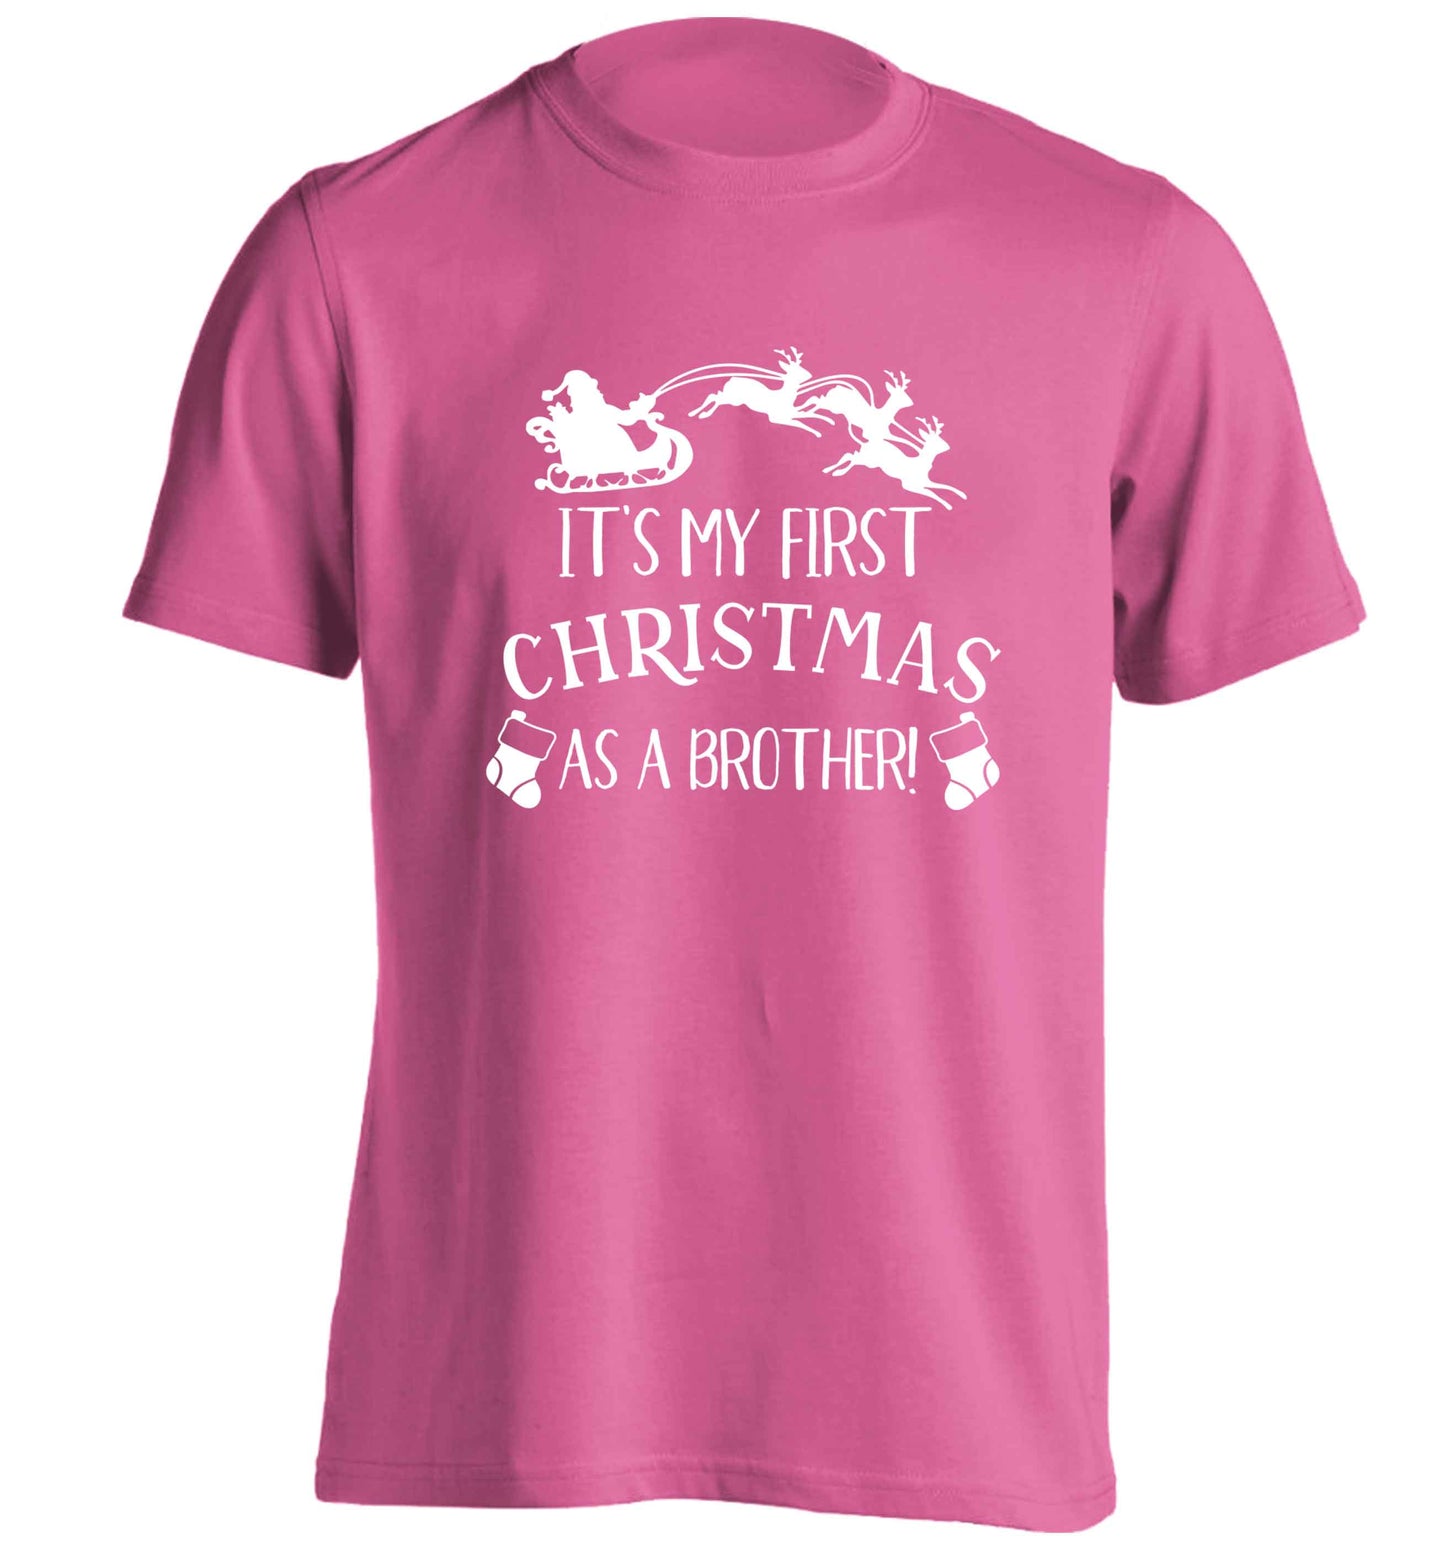 It's my first Christmas as a brother! adults unisex pink Tshirt 2XL